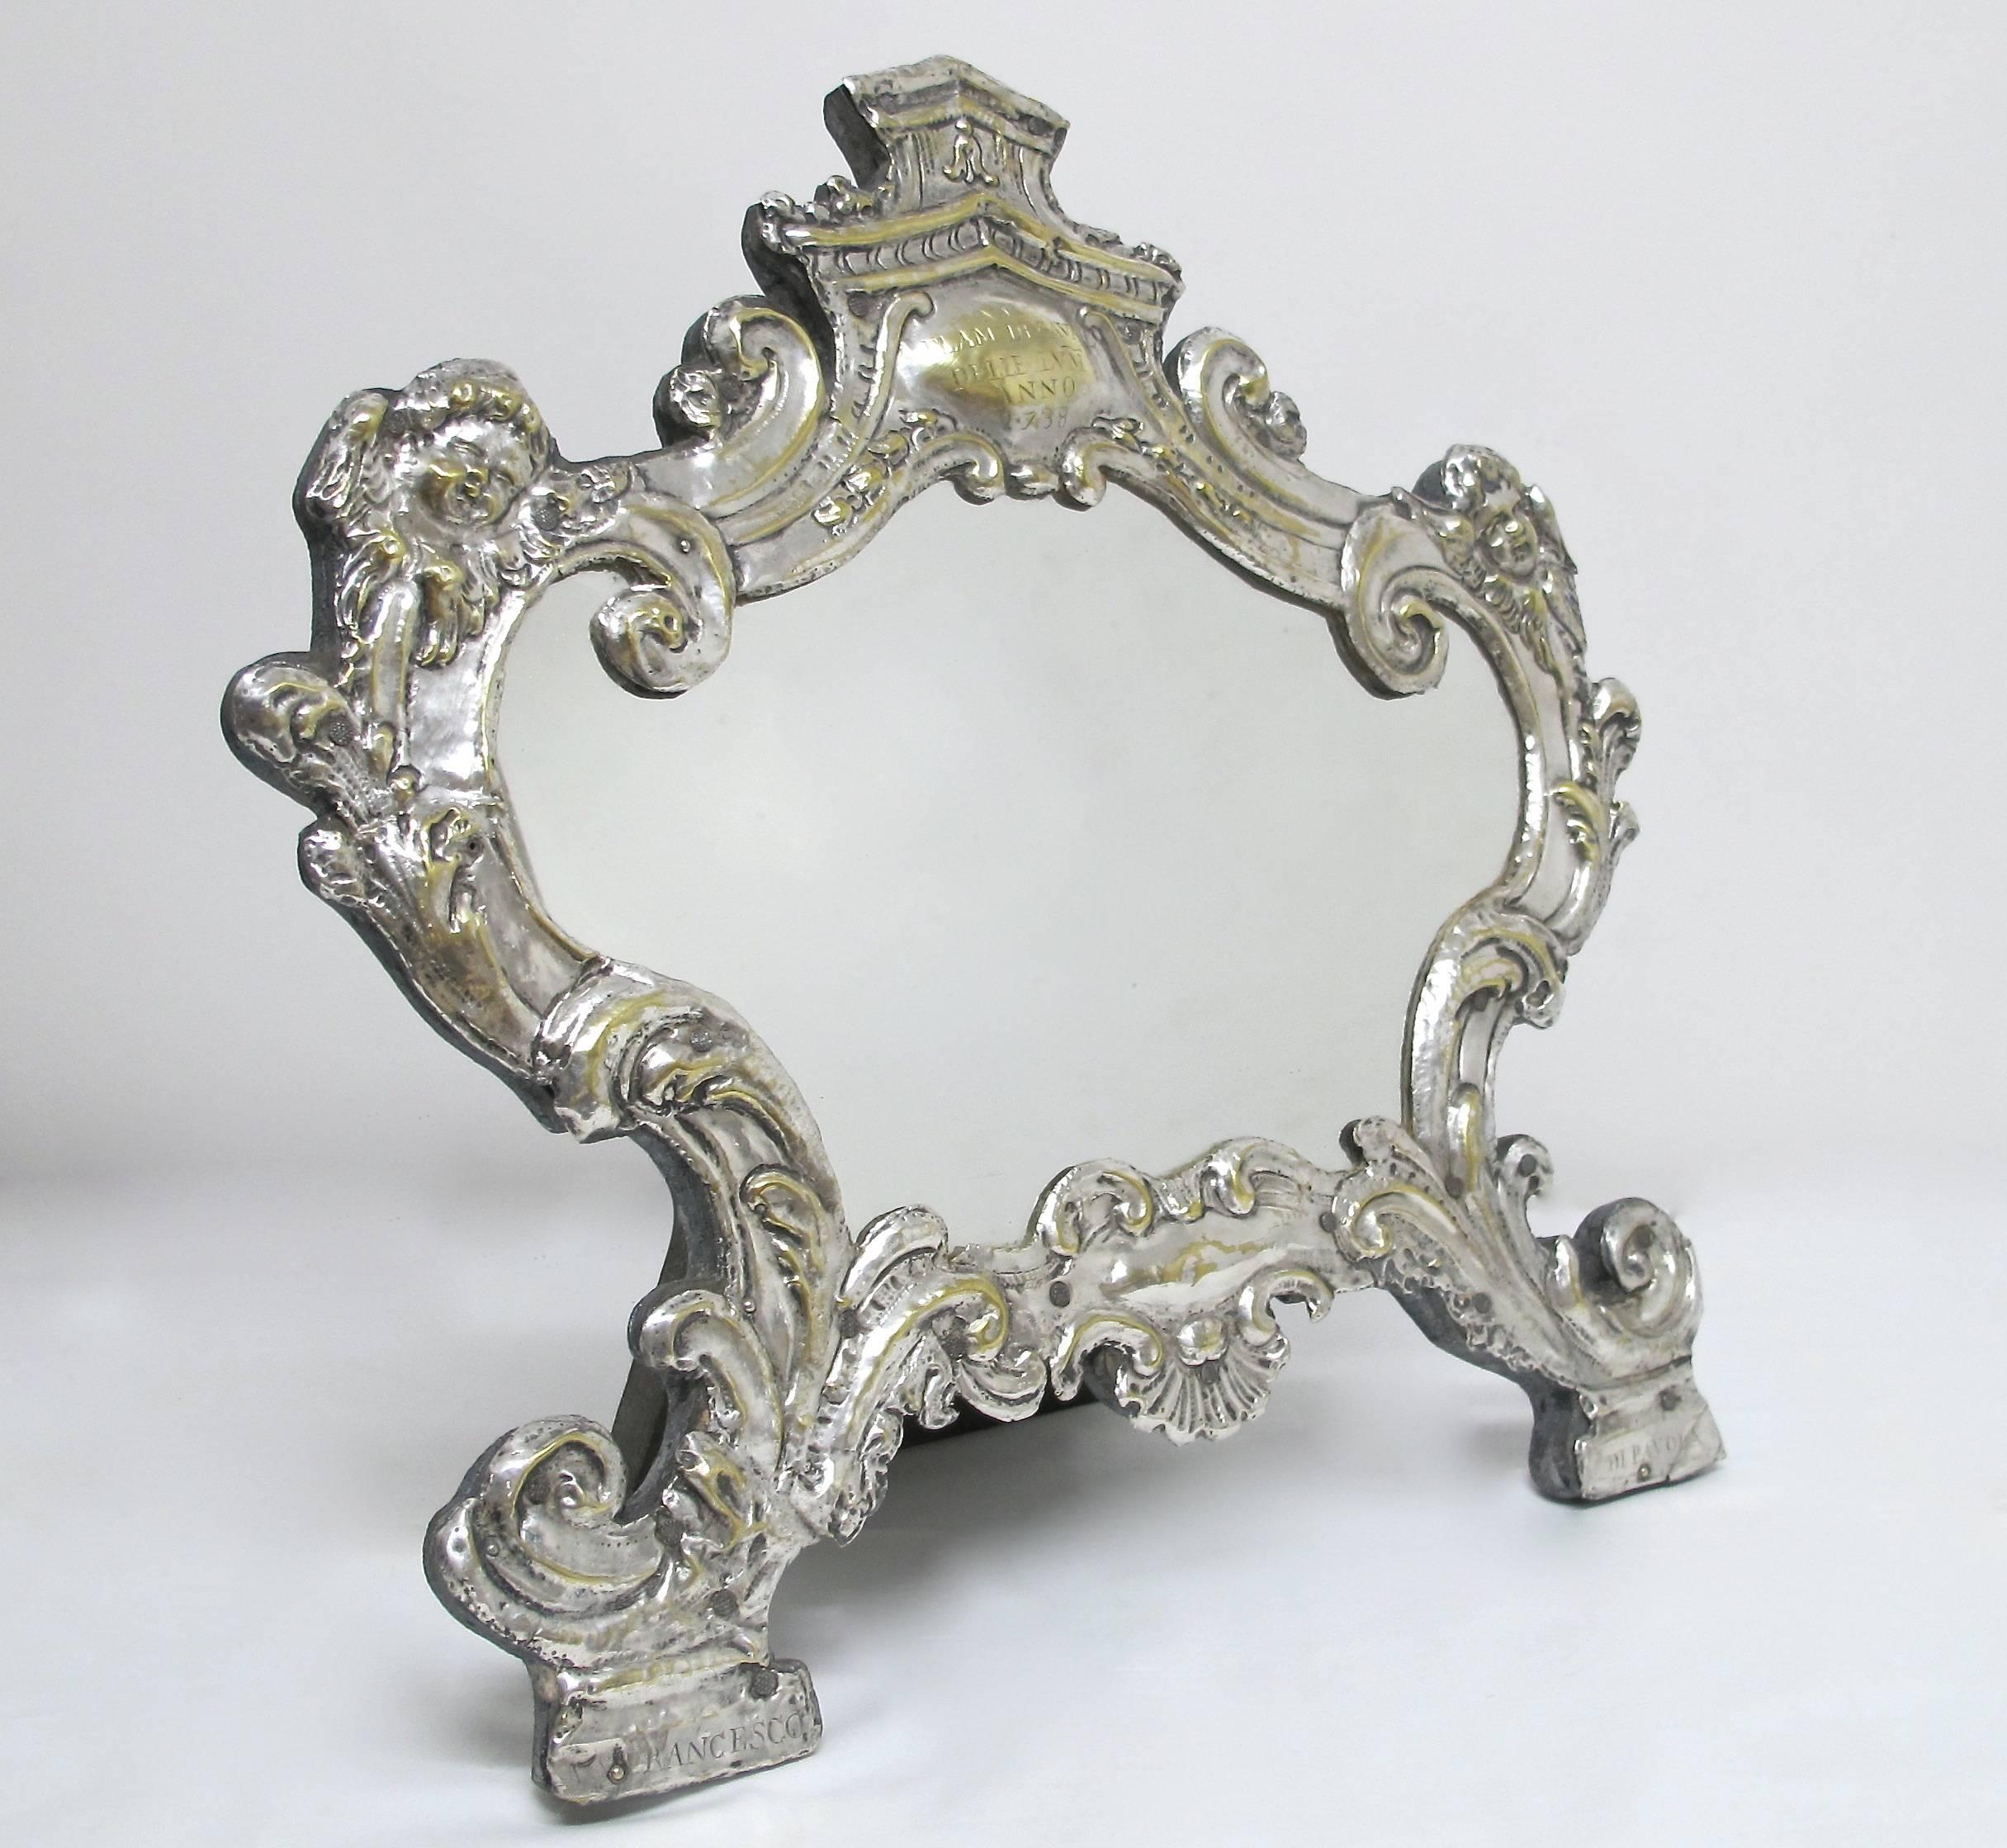 Beautiful old silver on brass frame. Originally a memento mori and would have held written information honoring a loved one who had passed. There is an engraved name (Elam DF Cavall, Delle LVM, ANNO 1738) at the top of the frame.On either leg reads